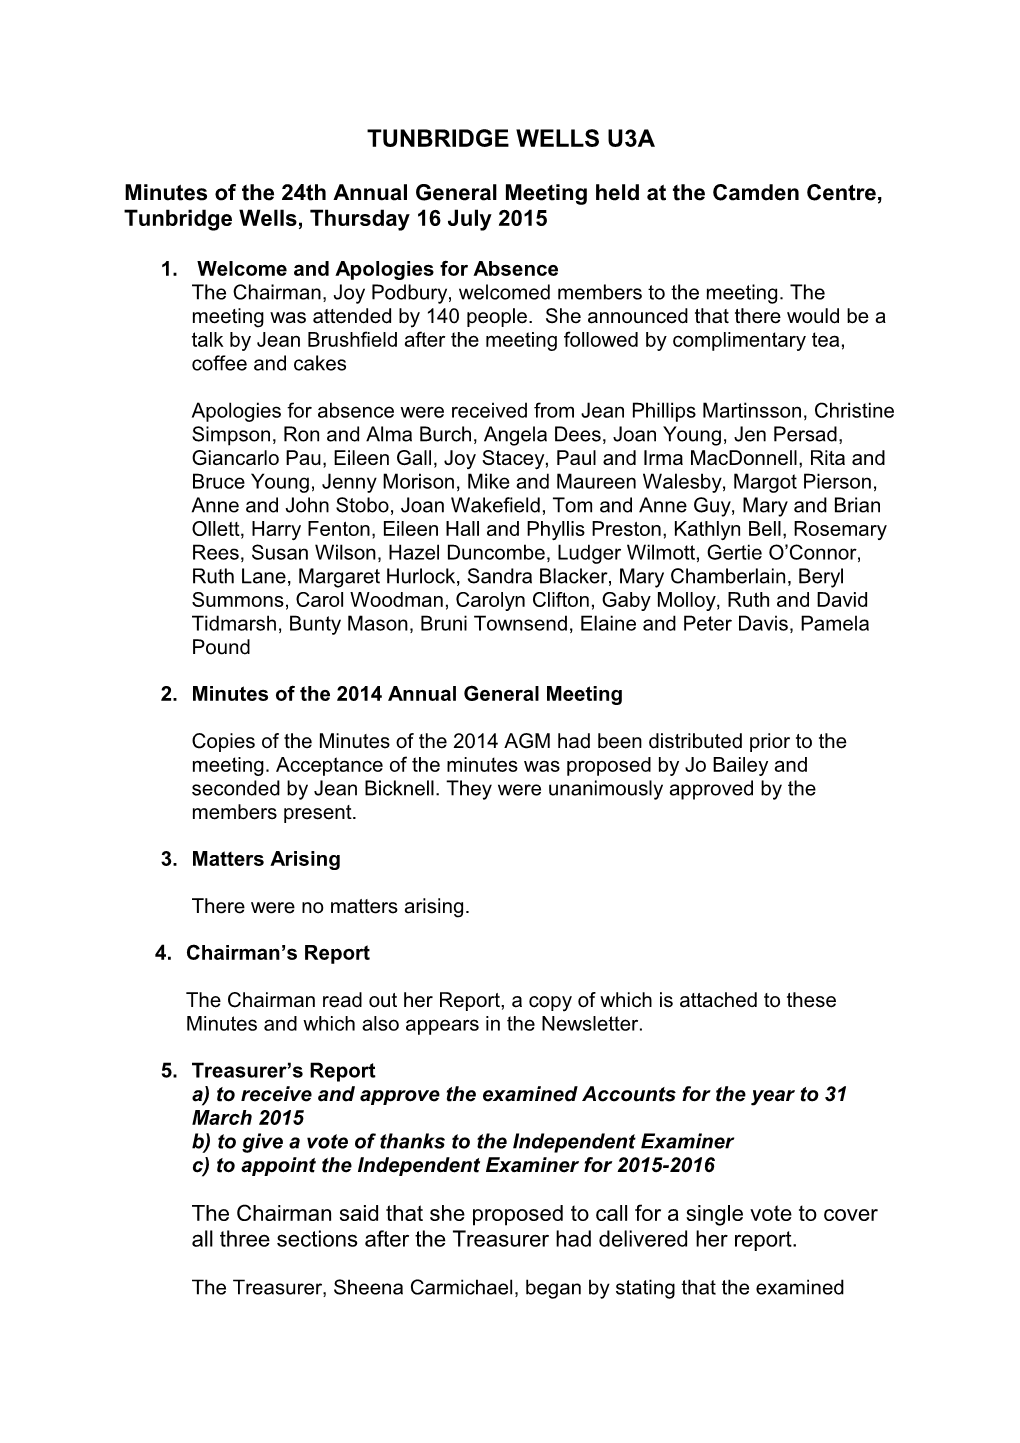 Minutes of the 24Th Annual General Meeting Held at the Camden Centre